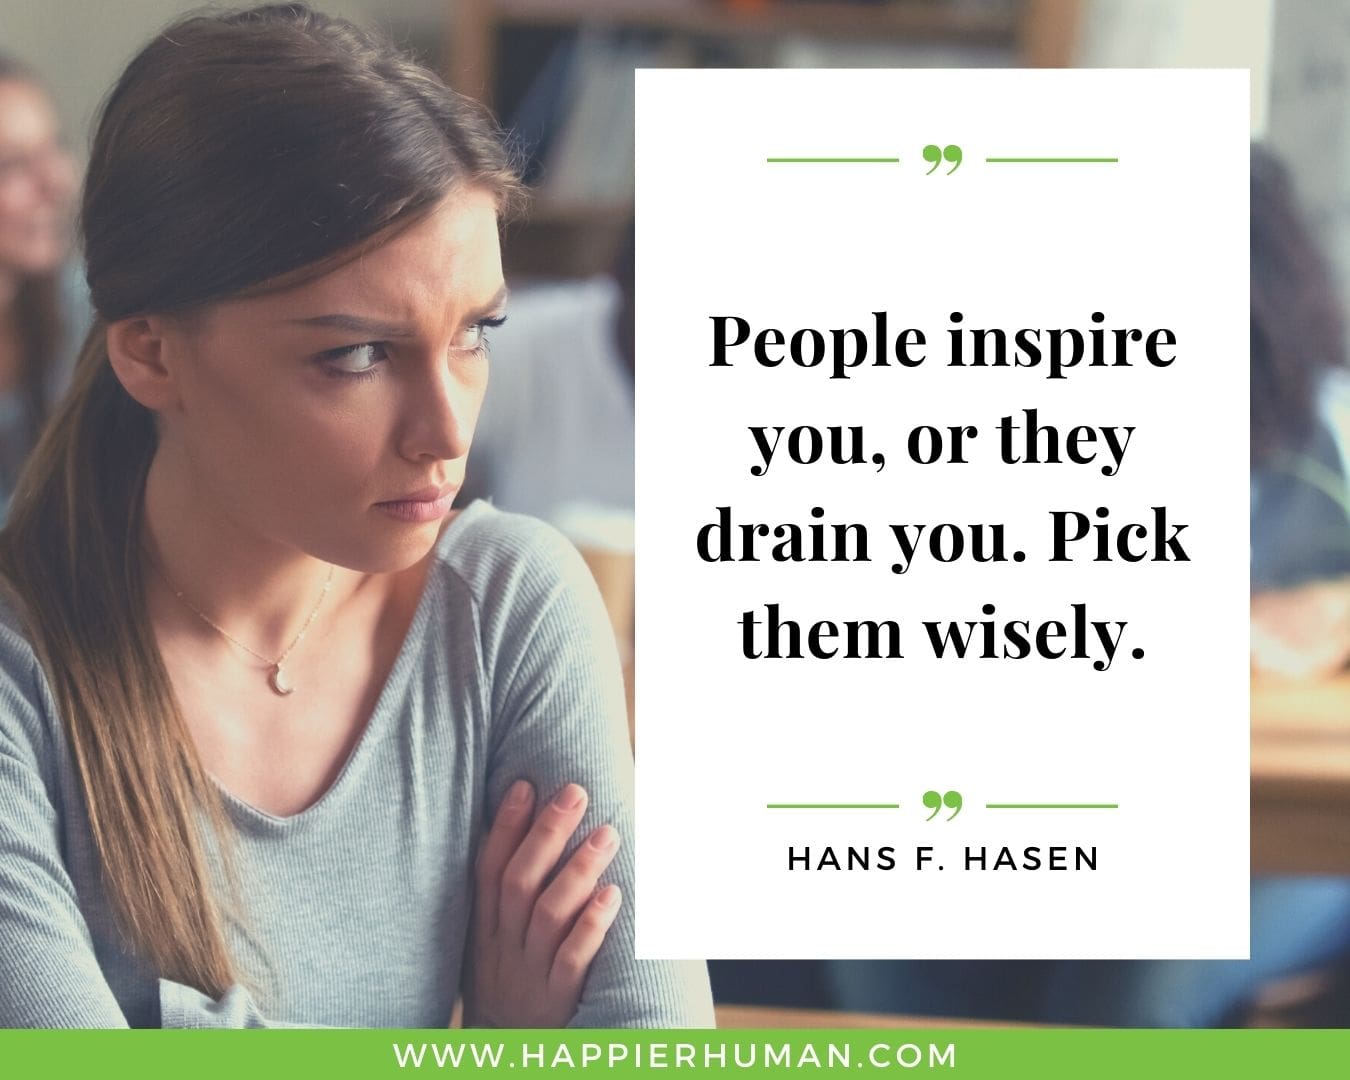 Toxic People Quotes - “People inspire you, or they drain you. Pick them wisely.” – Hans F. Hasen